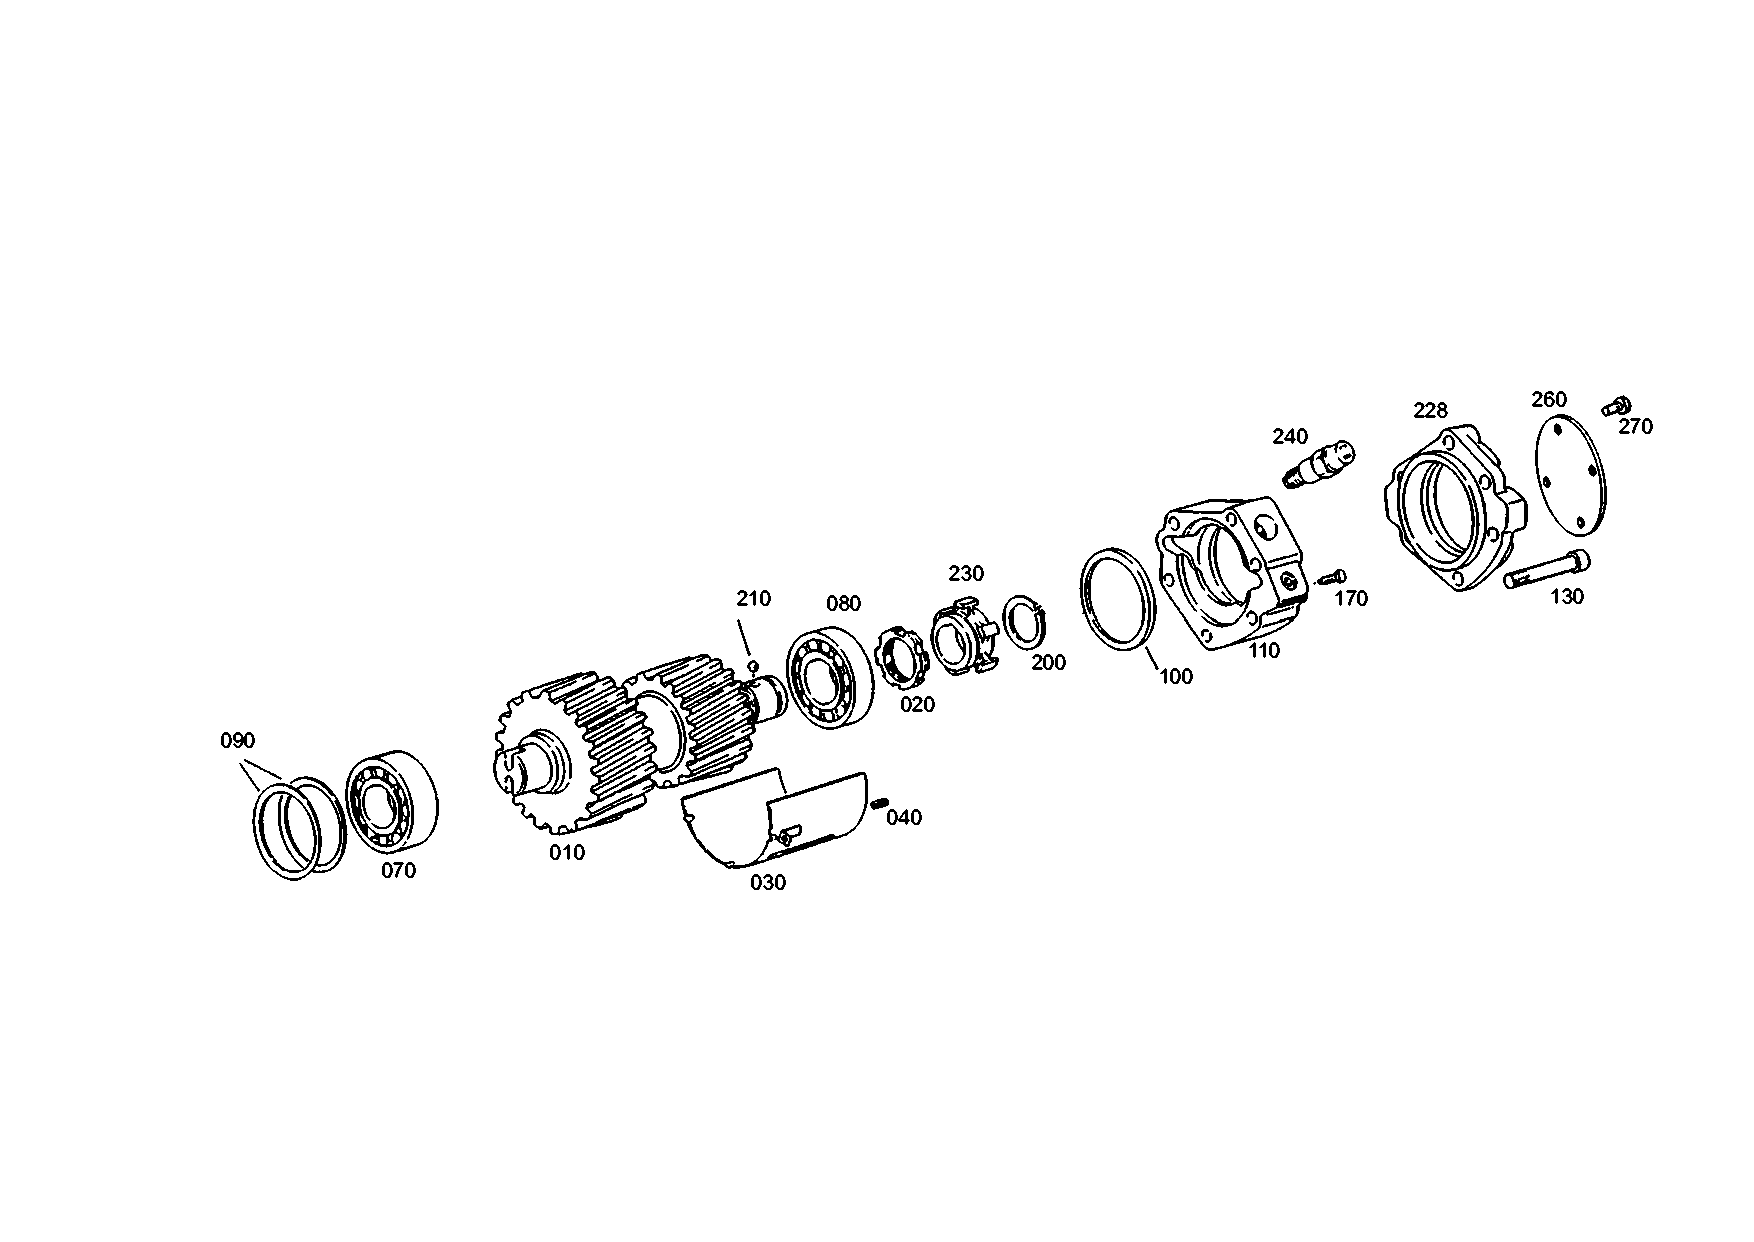 drawing for TITAN GMBH 199118250338 - PUMP CARRIER (figure 3)